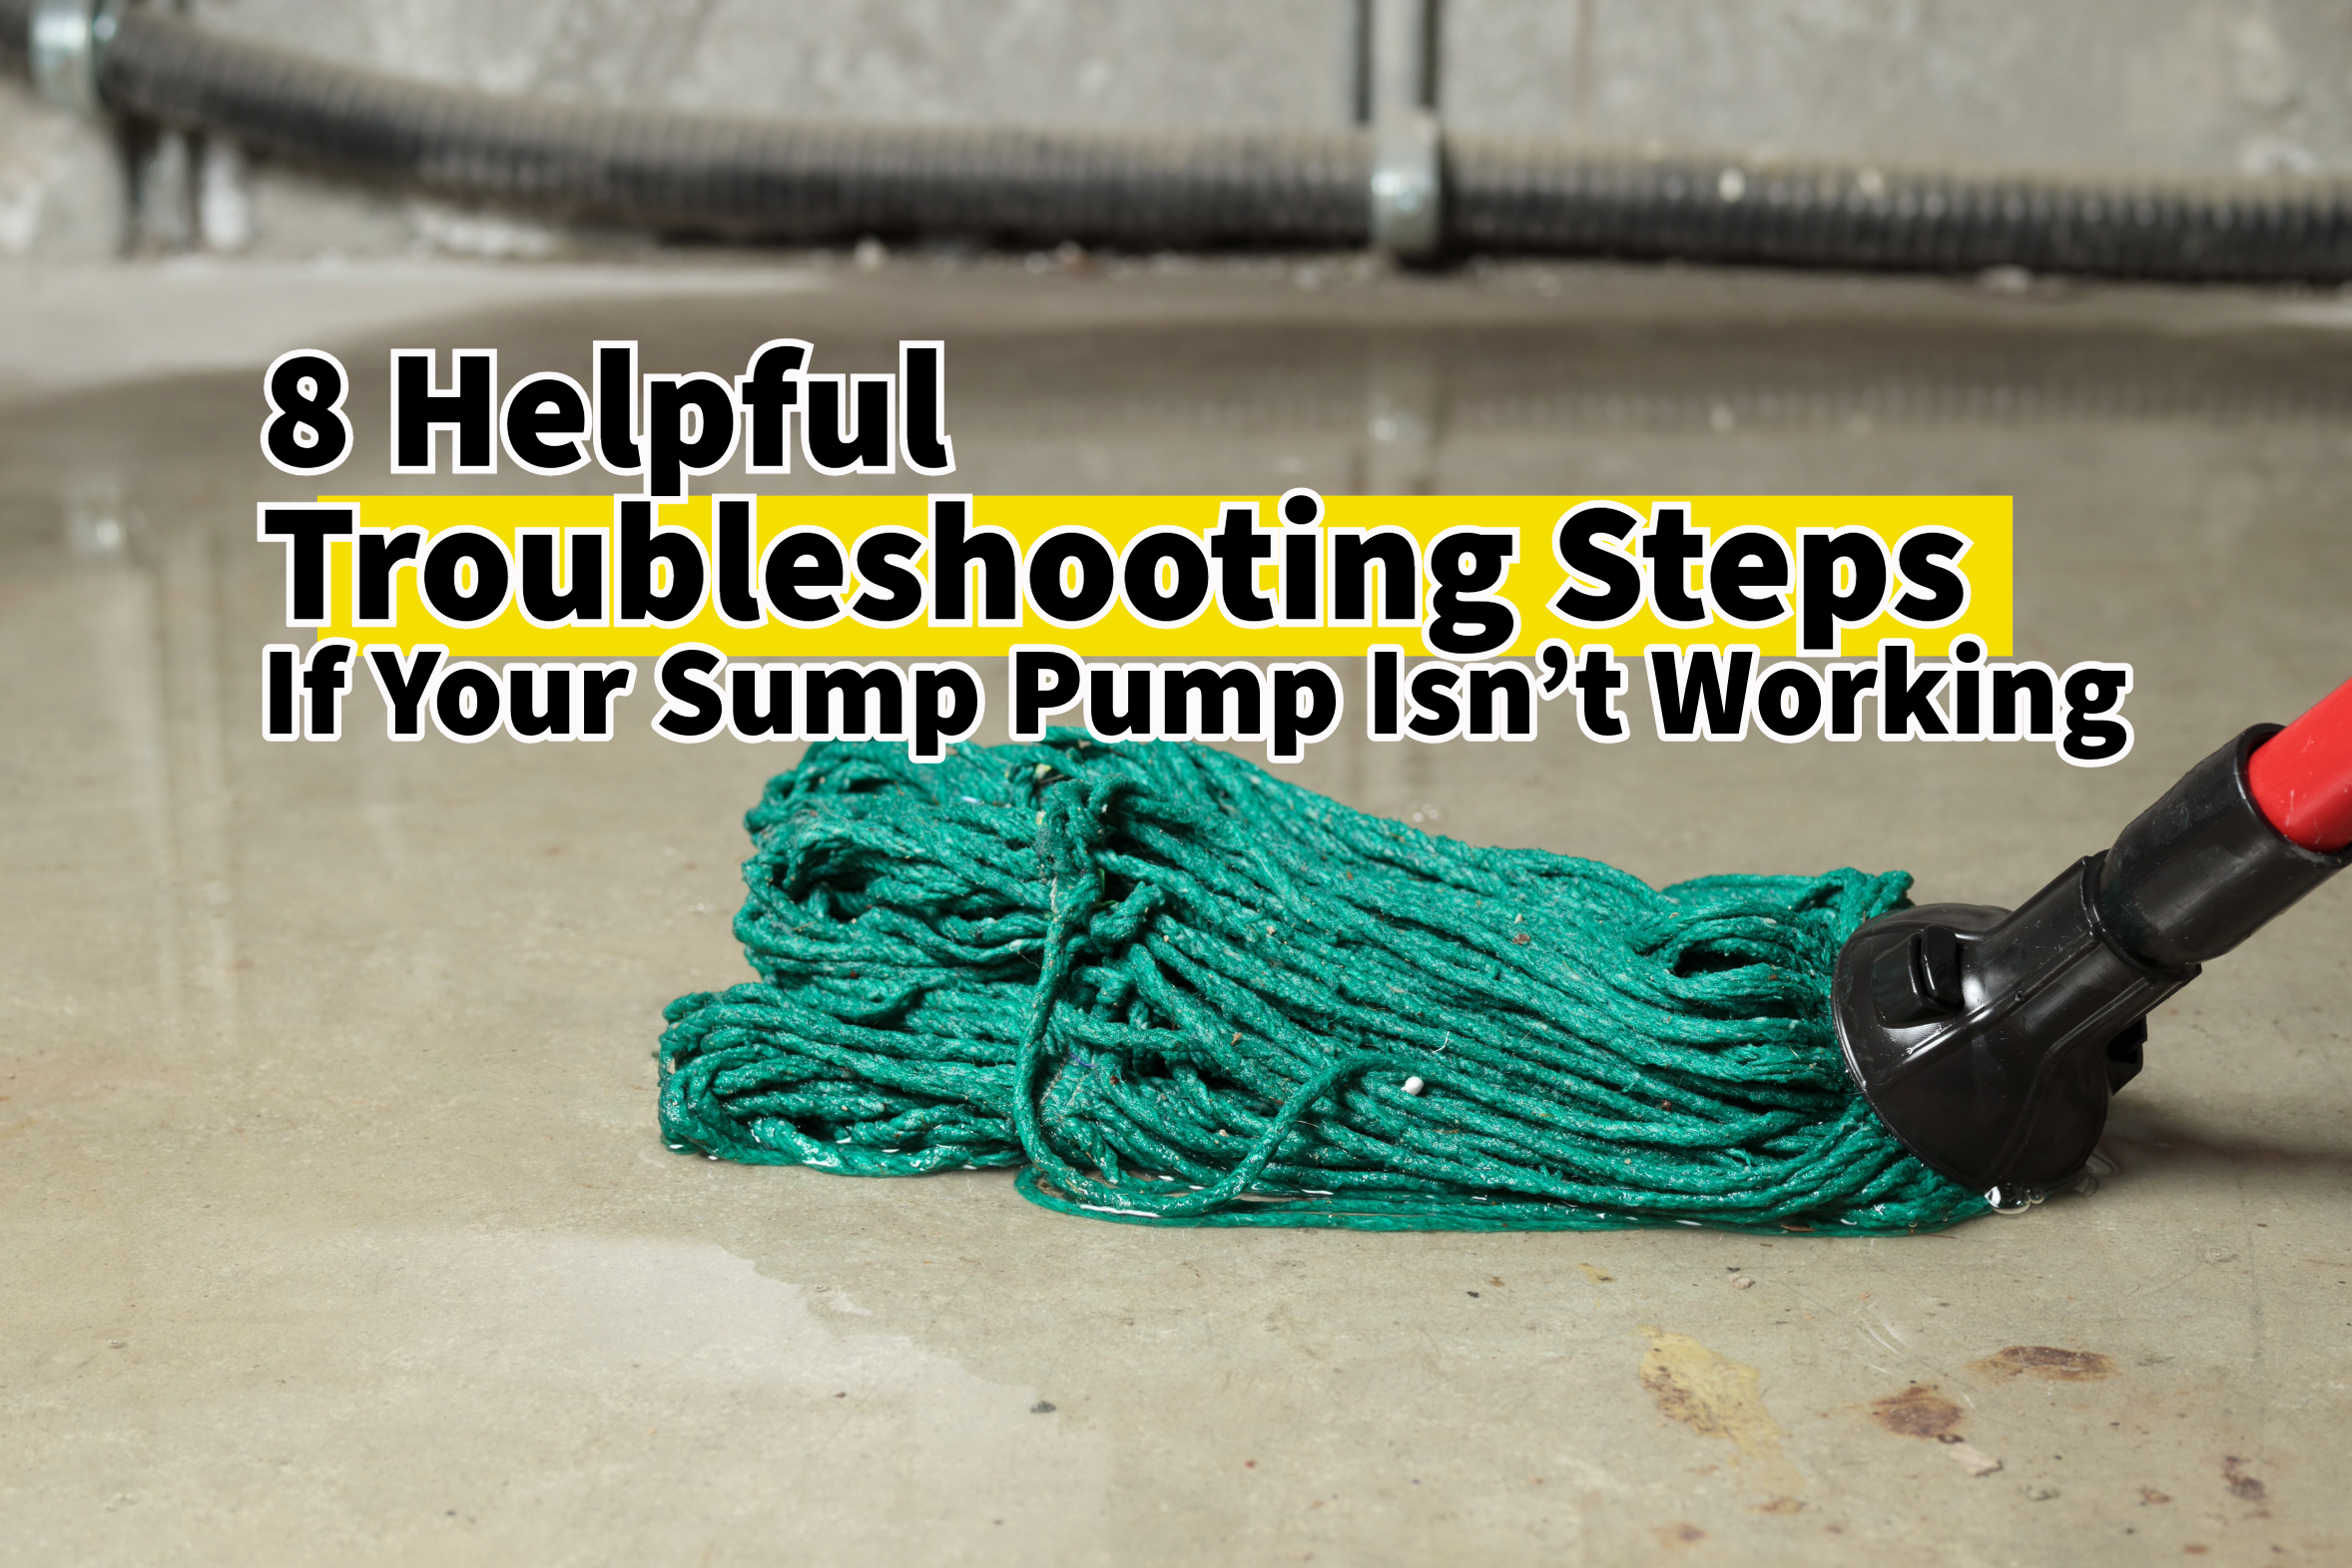 A homeowner’s guide to troubleshooting a malfunctioning sump pump. Plumbing and drain services in Pickerington, Ohio.